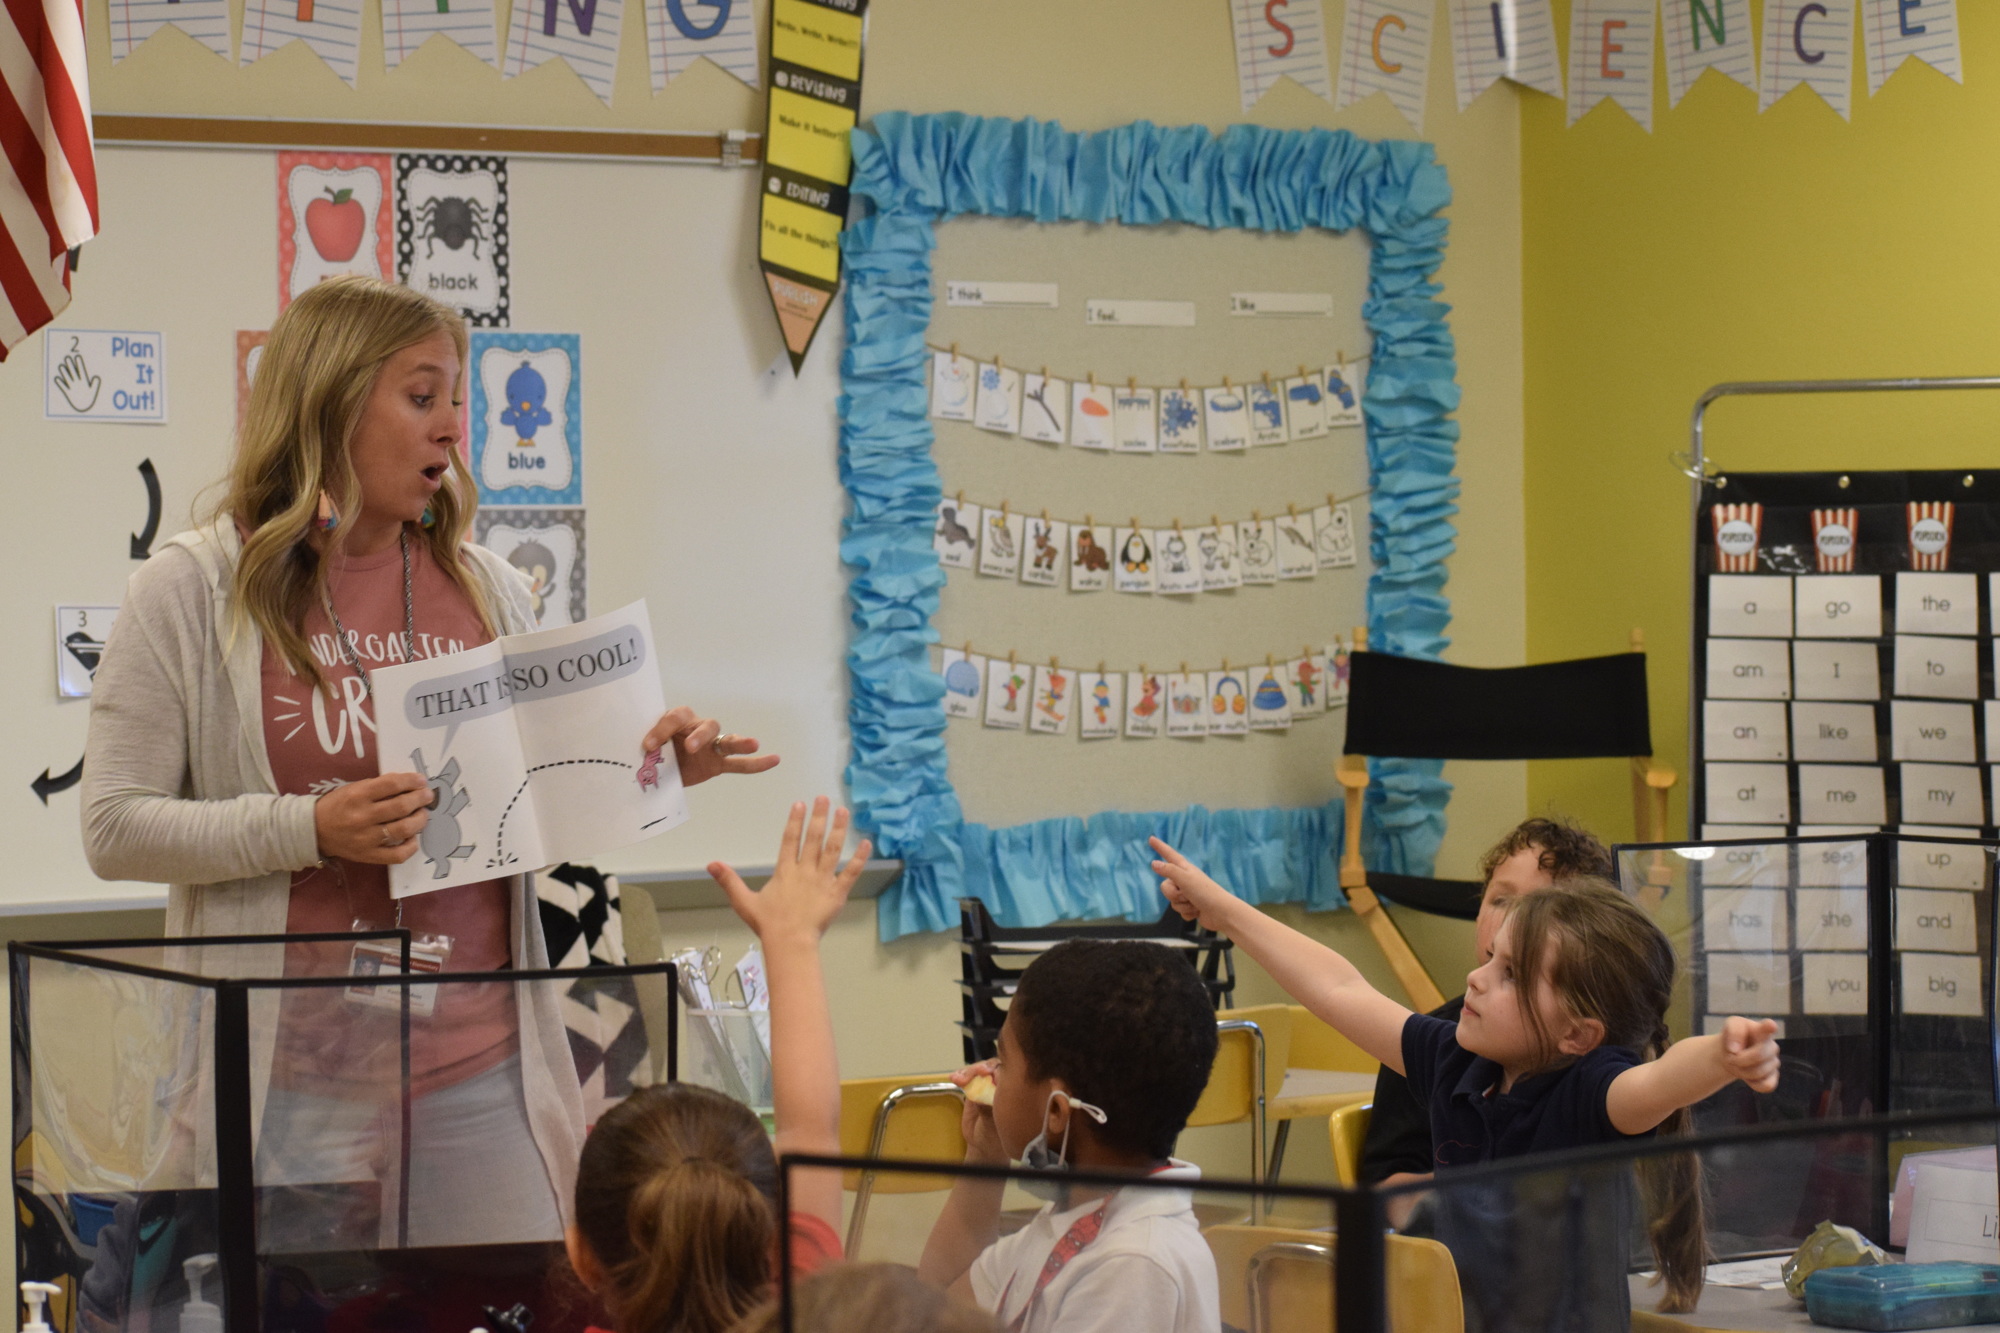 Kaehla Eidson, a kindergarten teacher, reads a book in English to her students. Eidson teaches the English portion of the dual-language program.